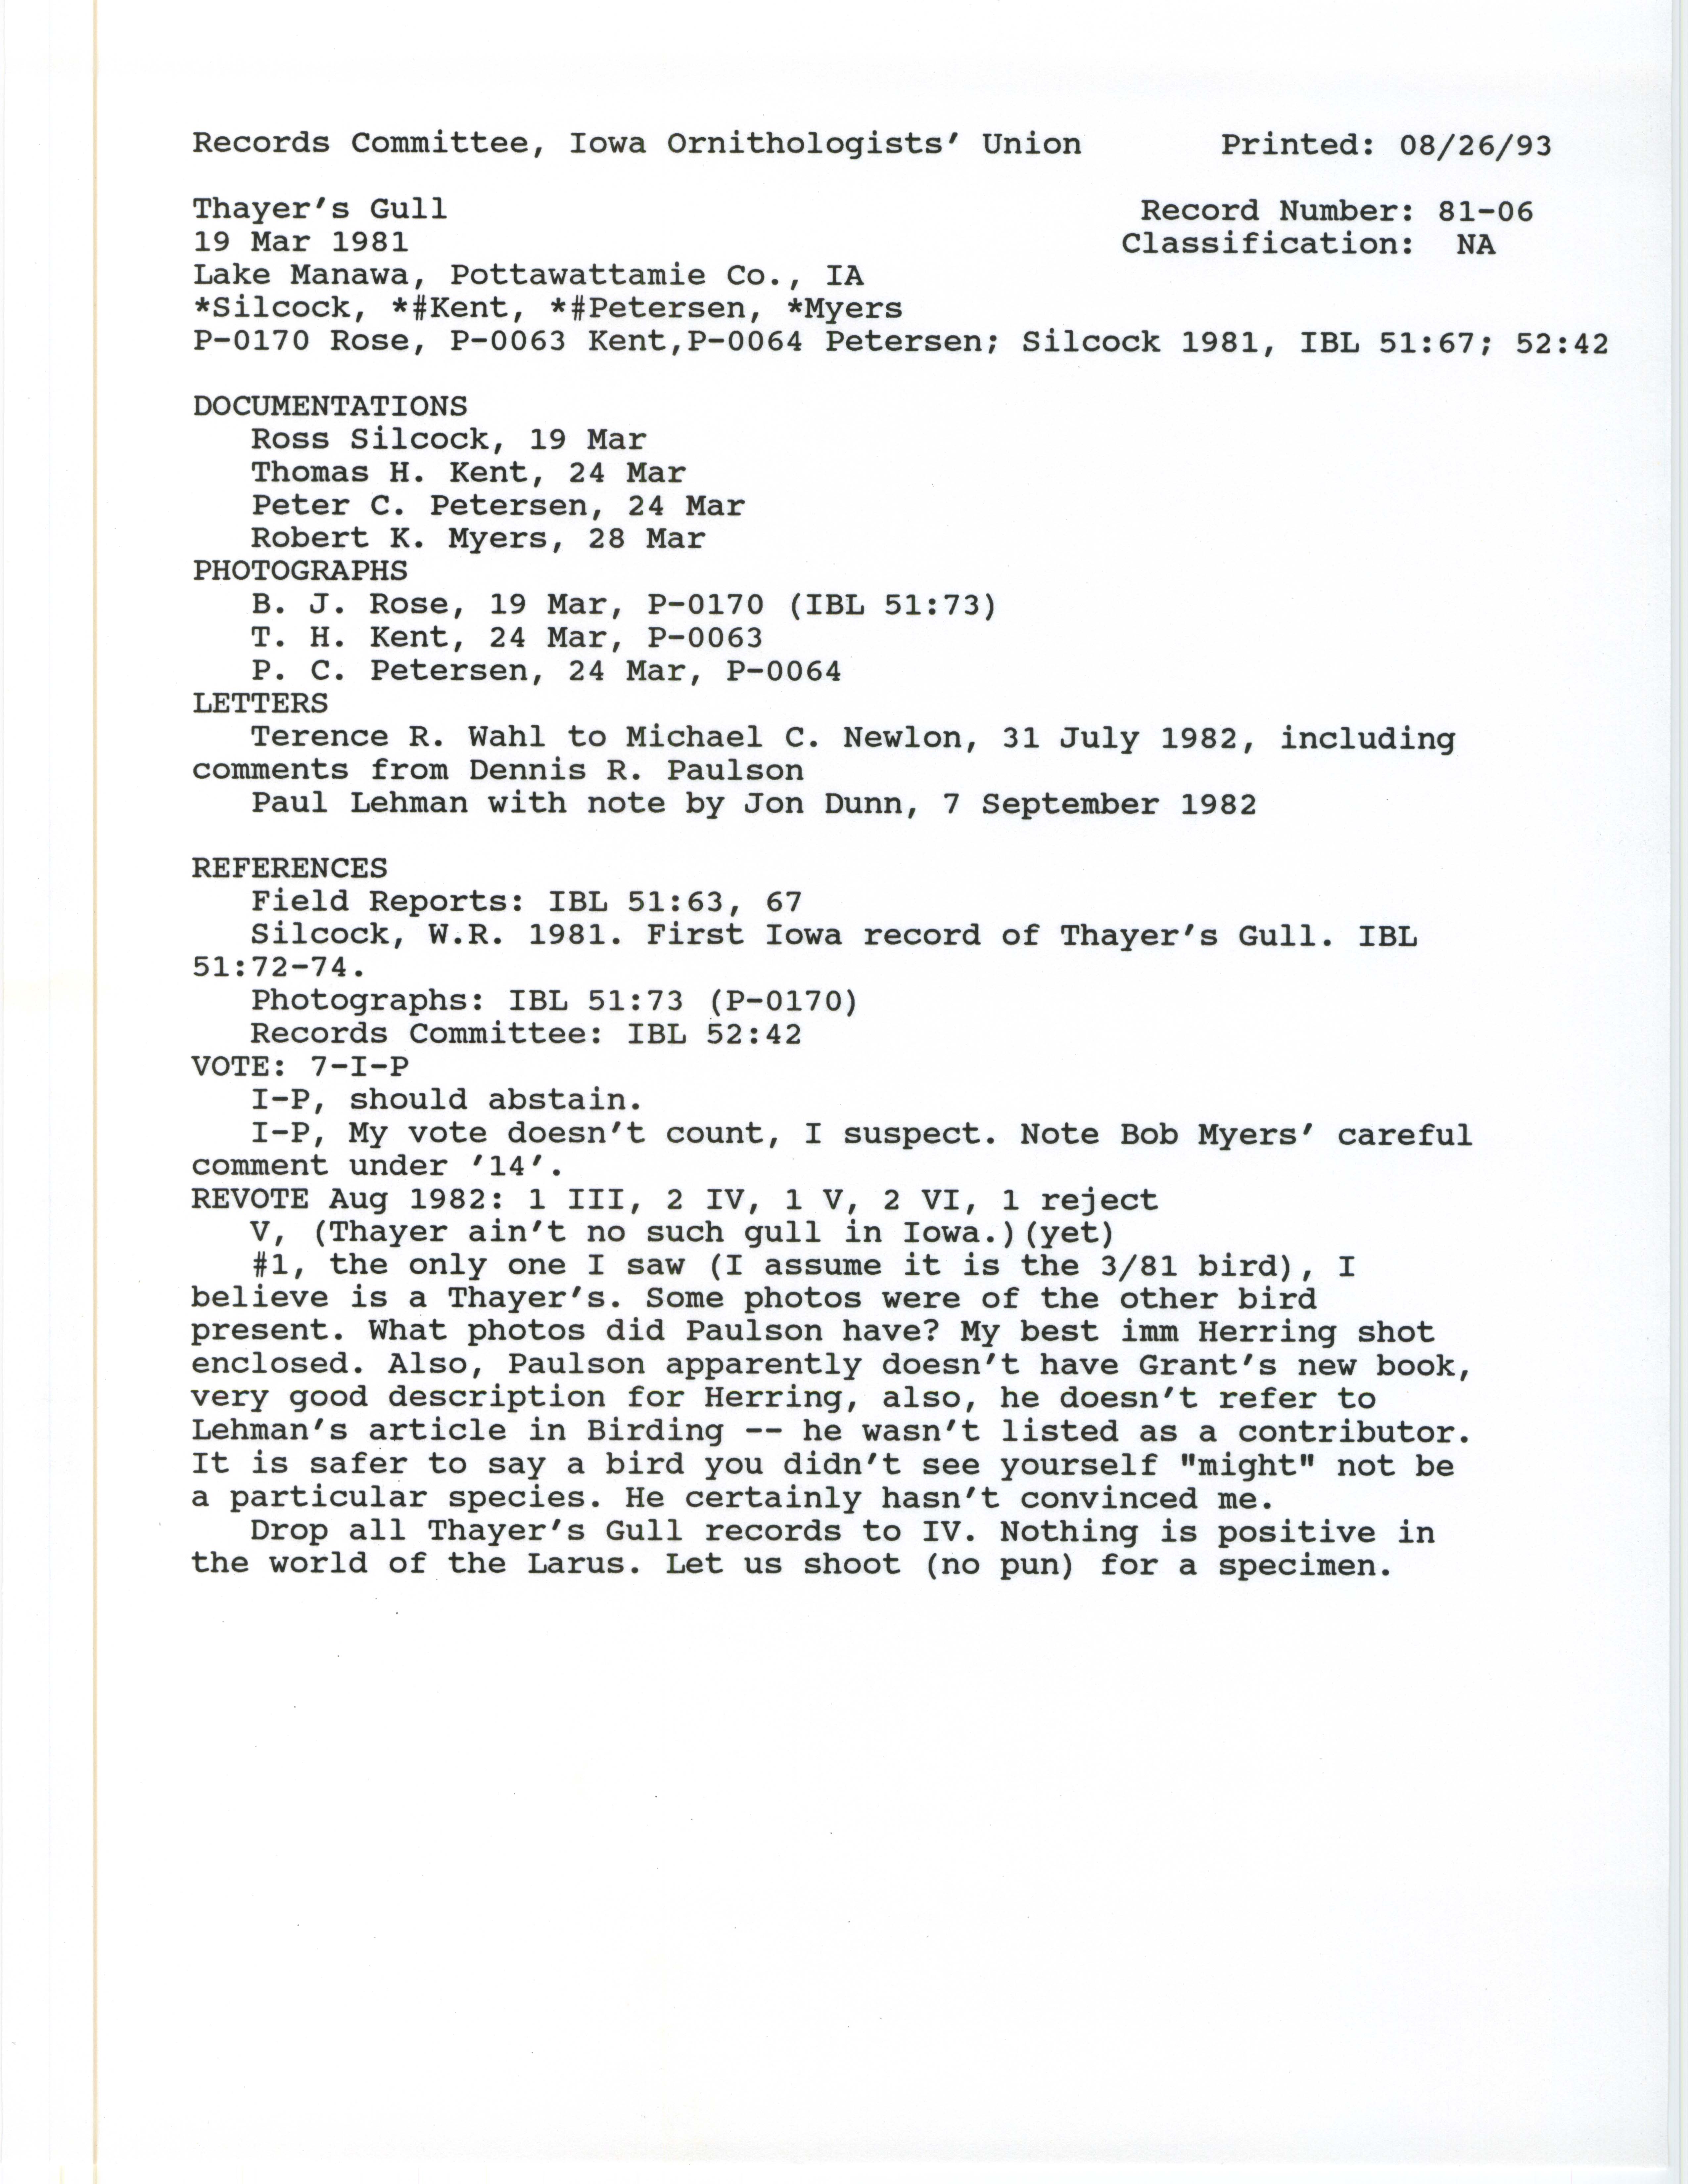 Records Committee review for rare bird sighting of Thayer's Gull at Lake Manawa, 1981